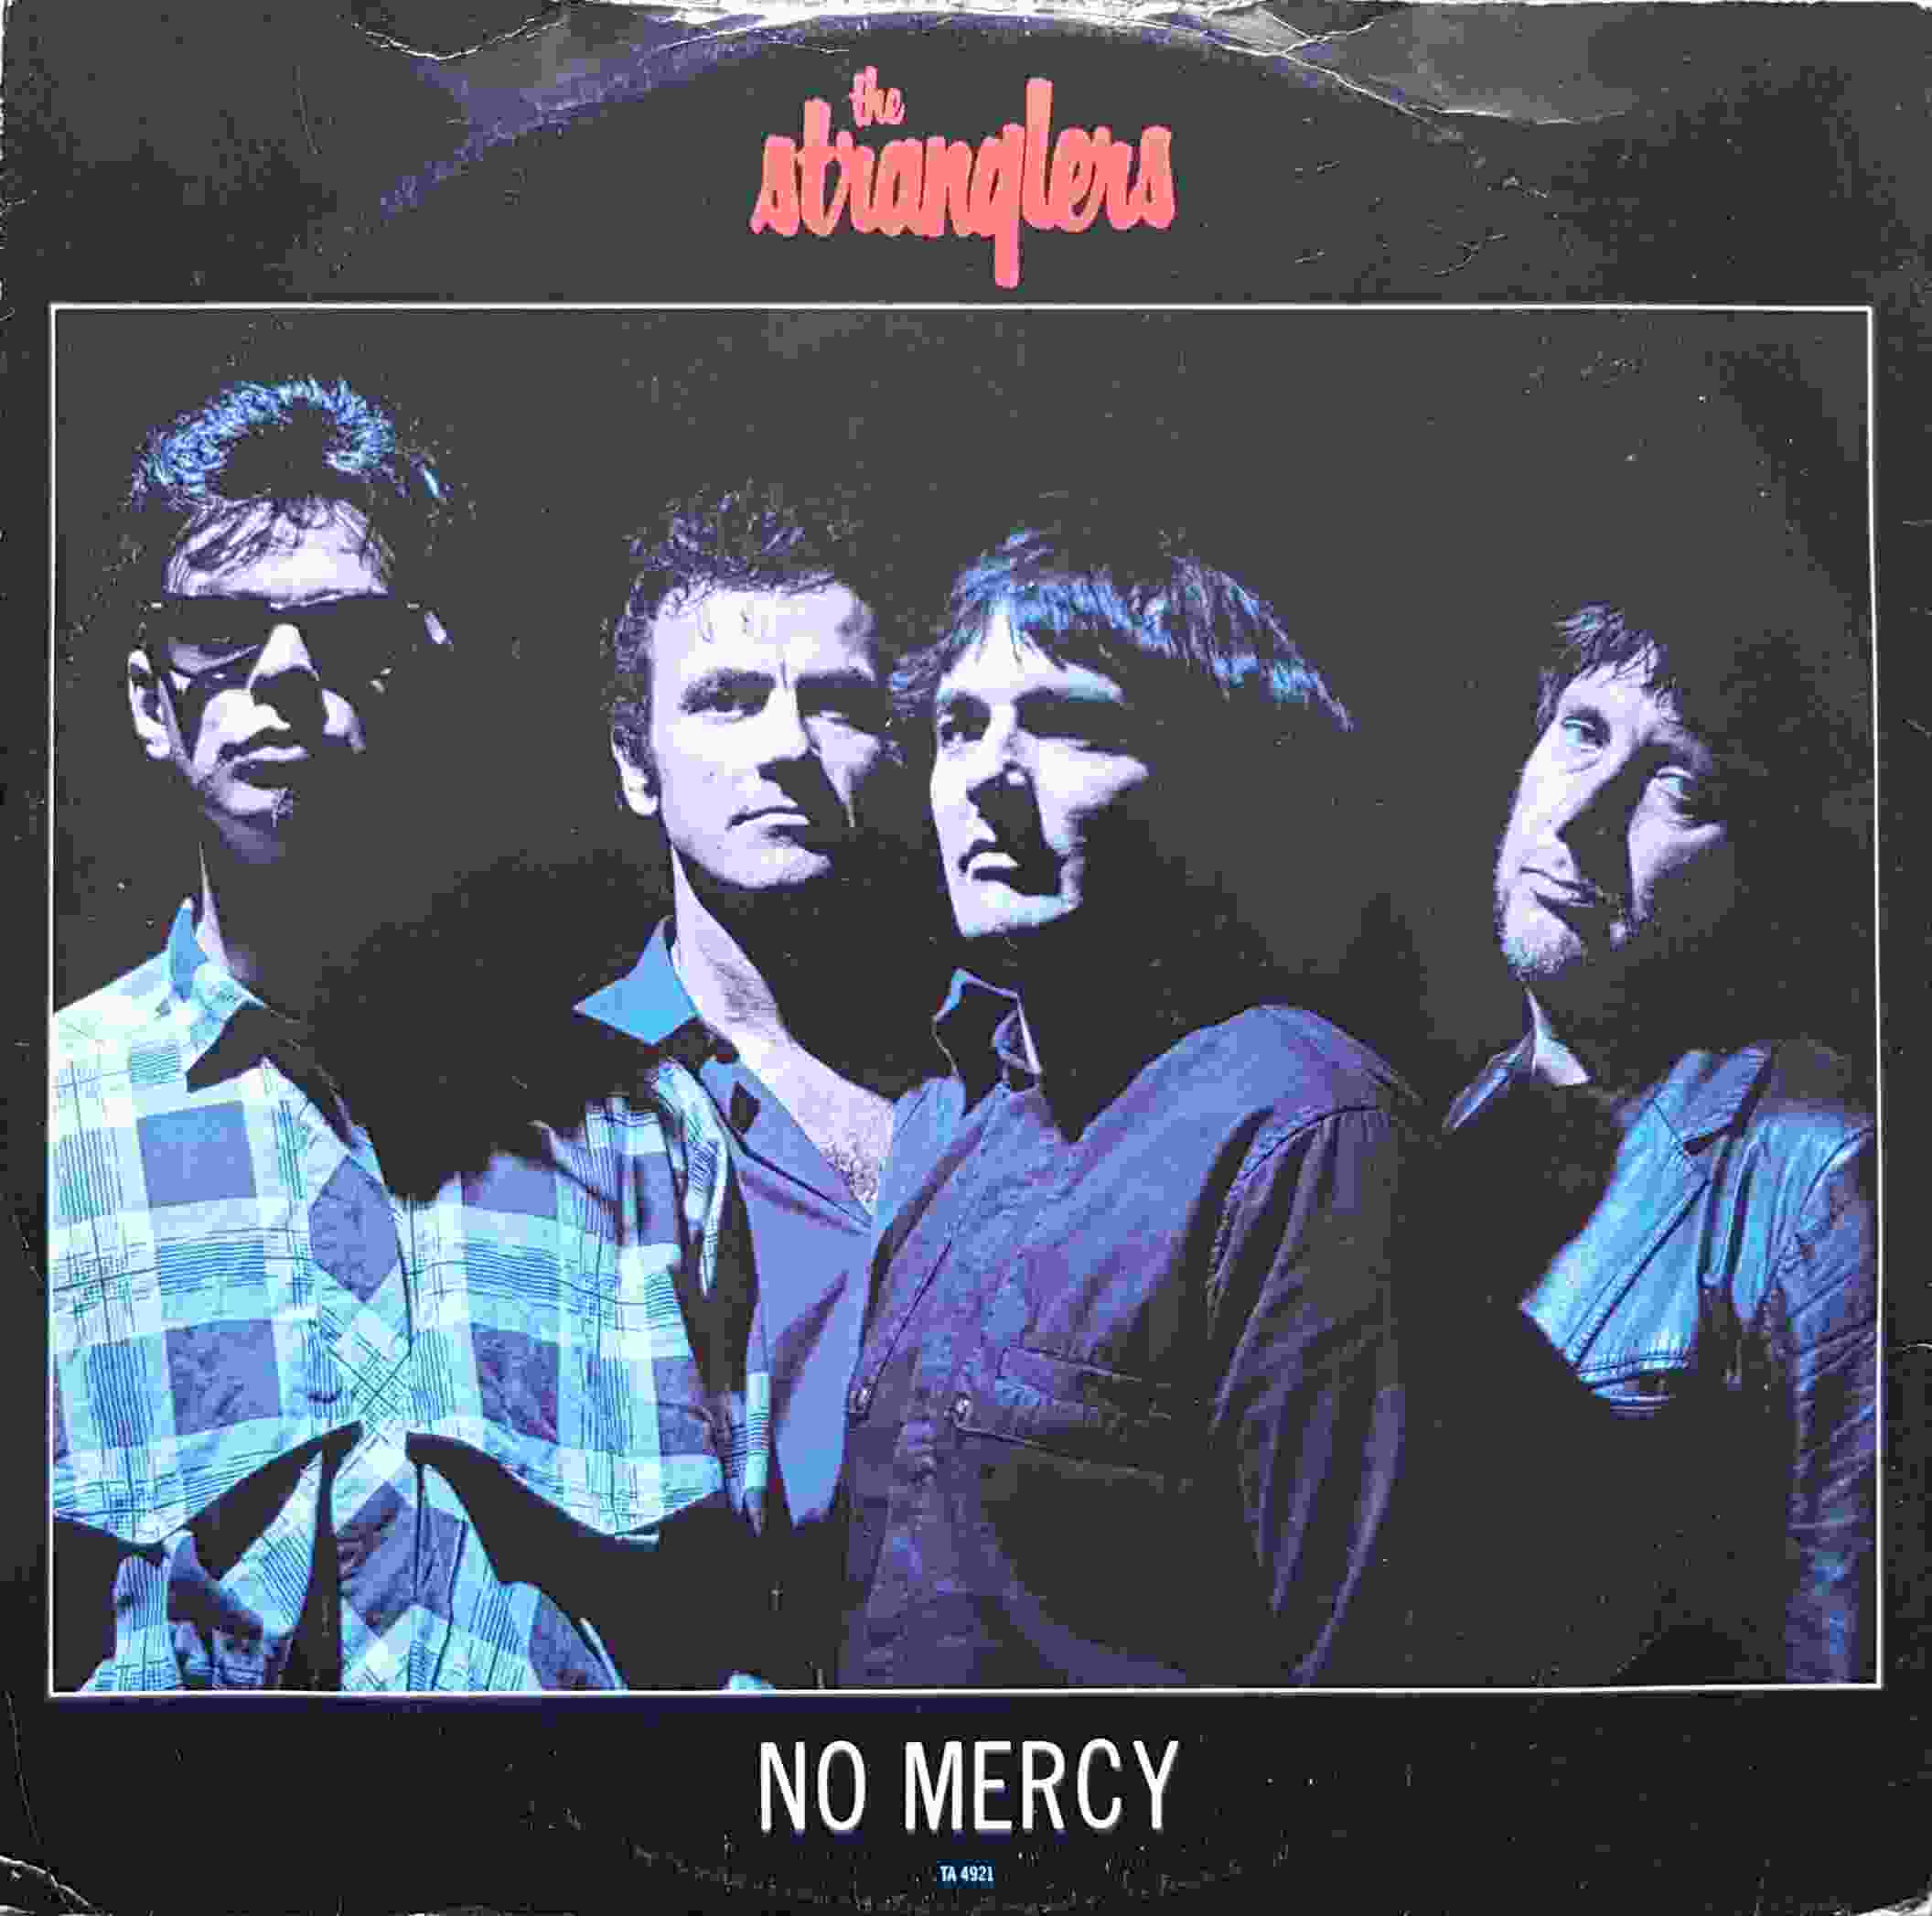 Picture of TA 4921 No mercy by artist The Stranglers